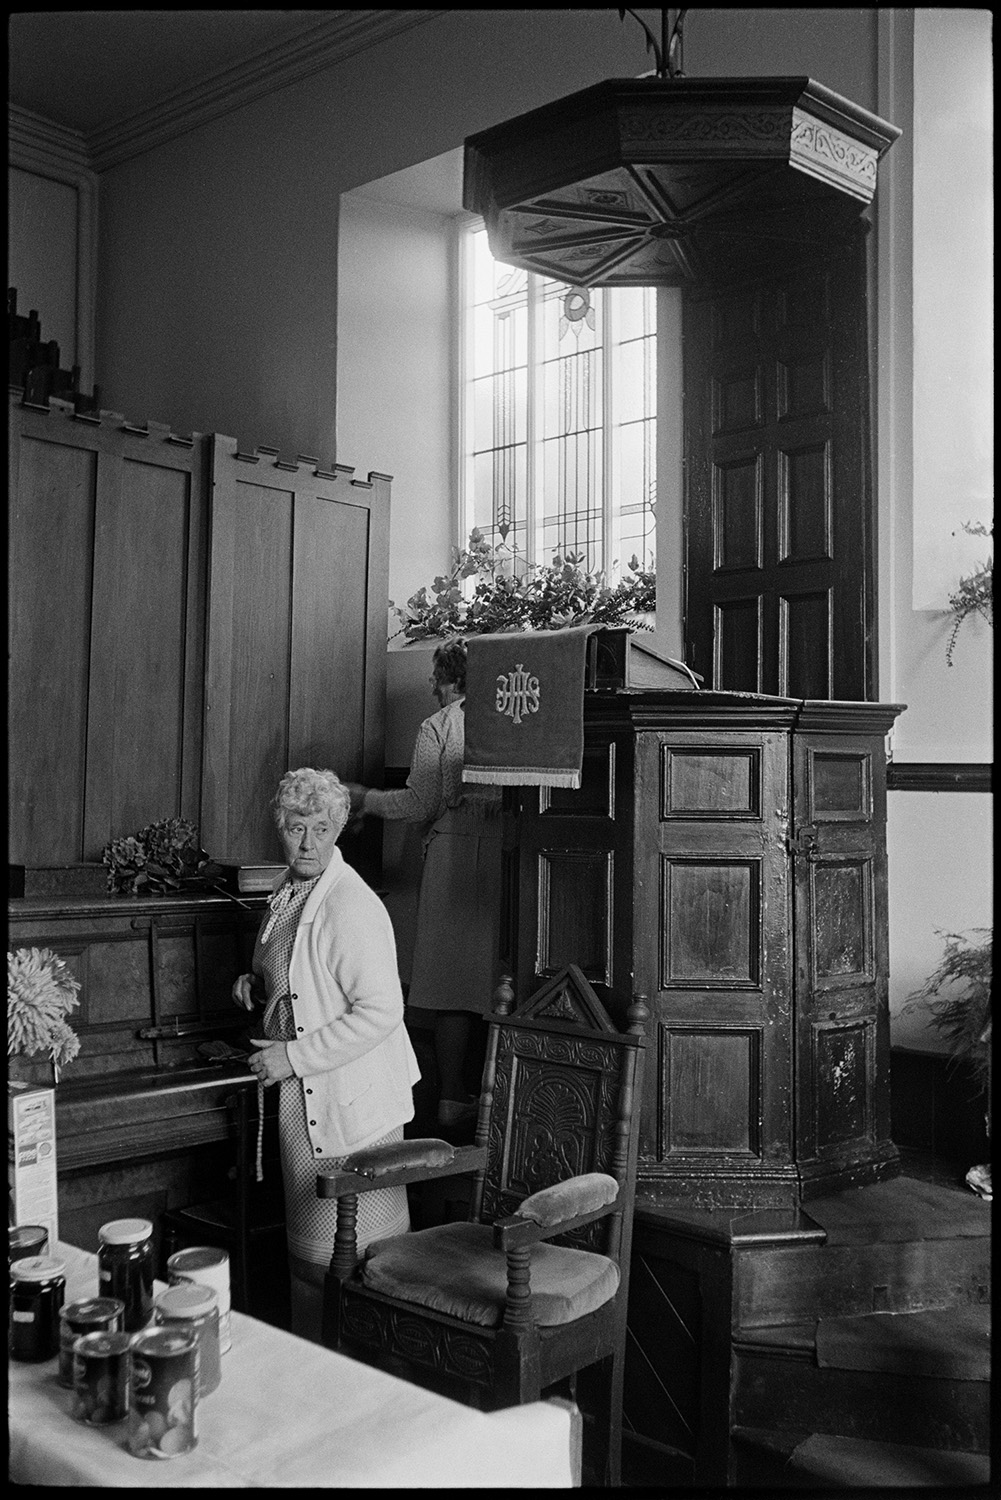 Congregational chapel interior, man playing organ to people decorating at Harvest Festival.
[Two women in Chulmleigh Congregational chapel helping with preparation for the Harvest Festival. An ornate wooden chair is in front of a table with tinned goods and jars for harvest. A wooden screen, pulpit and canopy alongside a decorated window are also visible.]